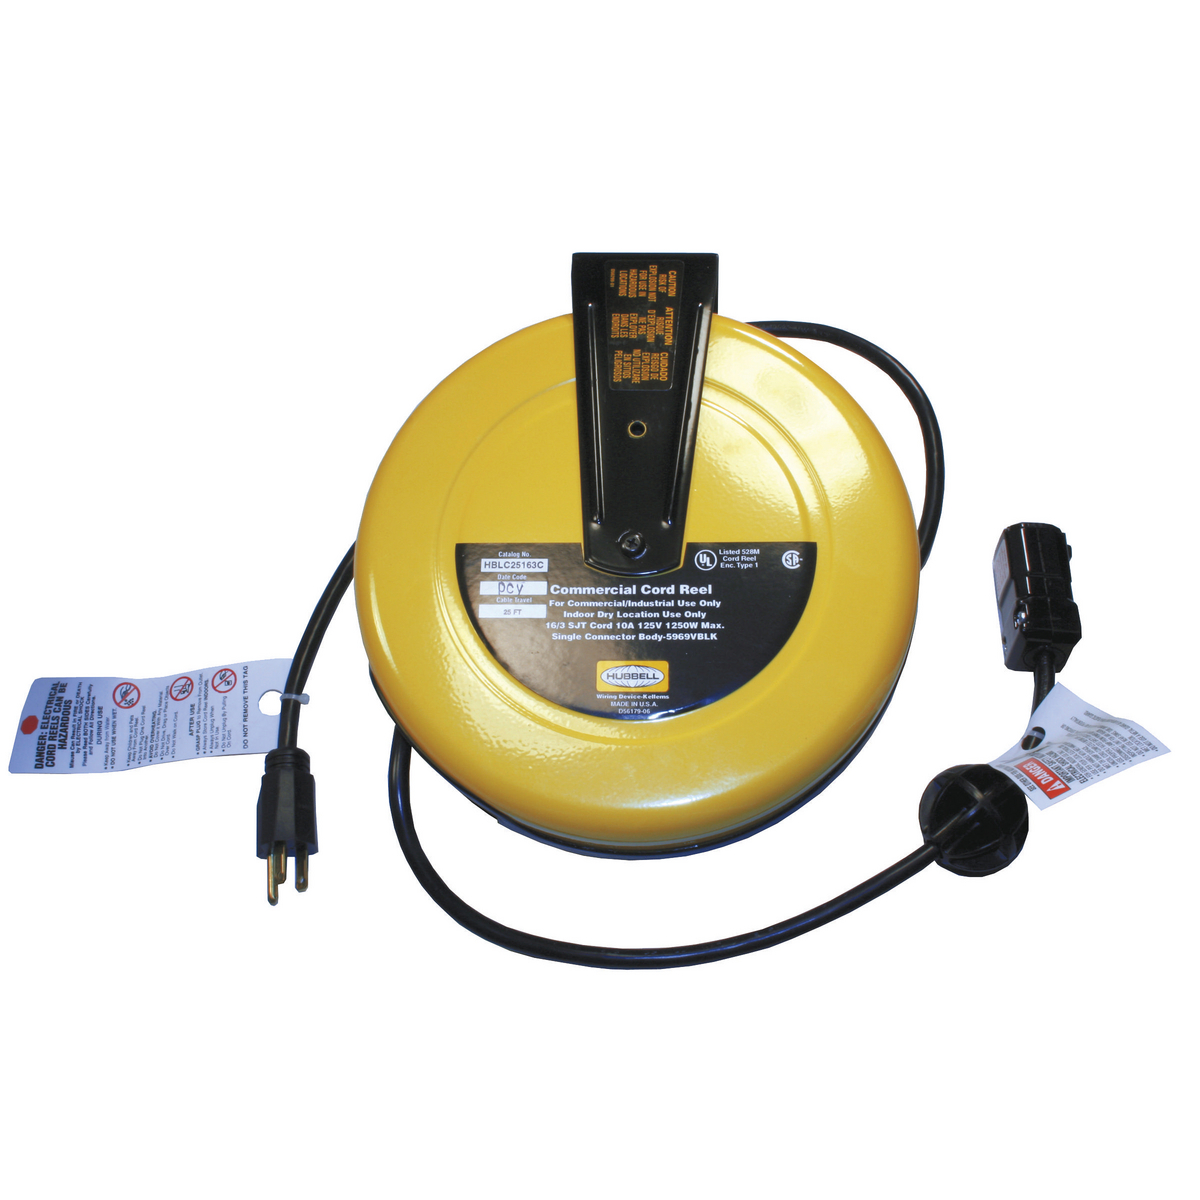 Extension cords, cord reels & portable boxes